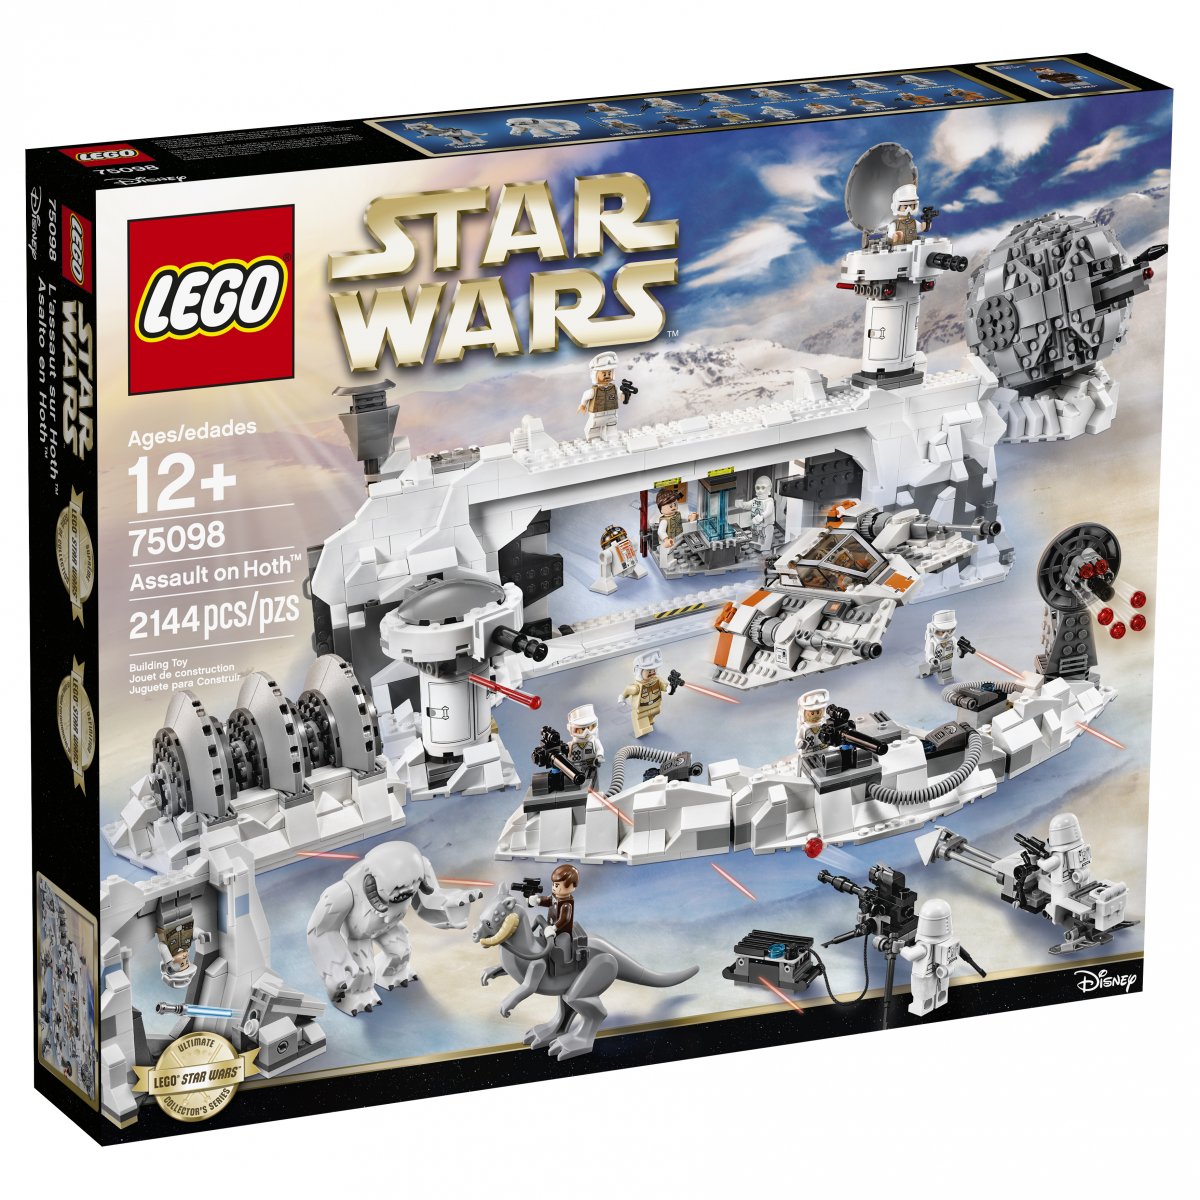 the-assault-on-hoth-set-will-be-available-may-1